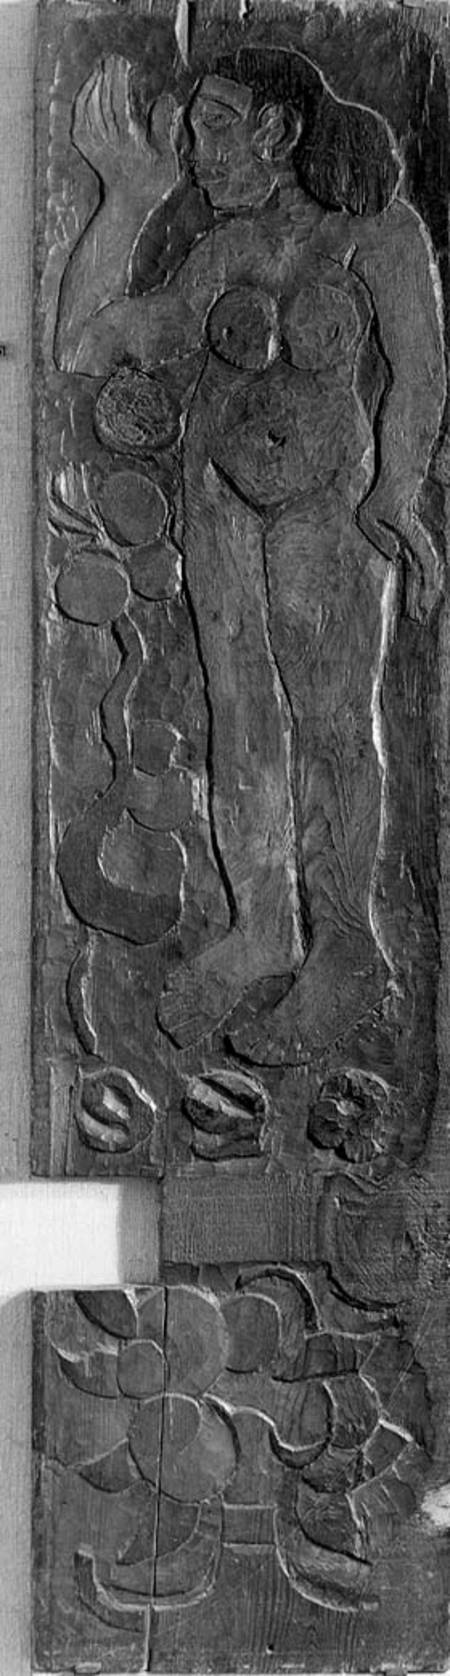 Carved vertical panel from the door frame of Gauguin's final residence in Atuona on Hiva Oa (Marques od Paul Gauguin